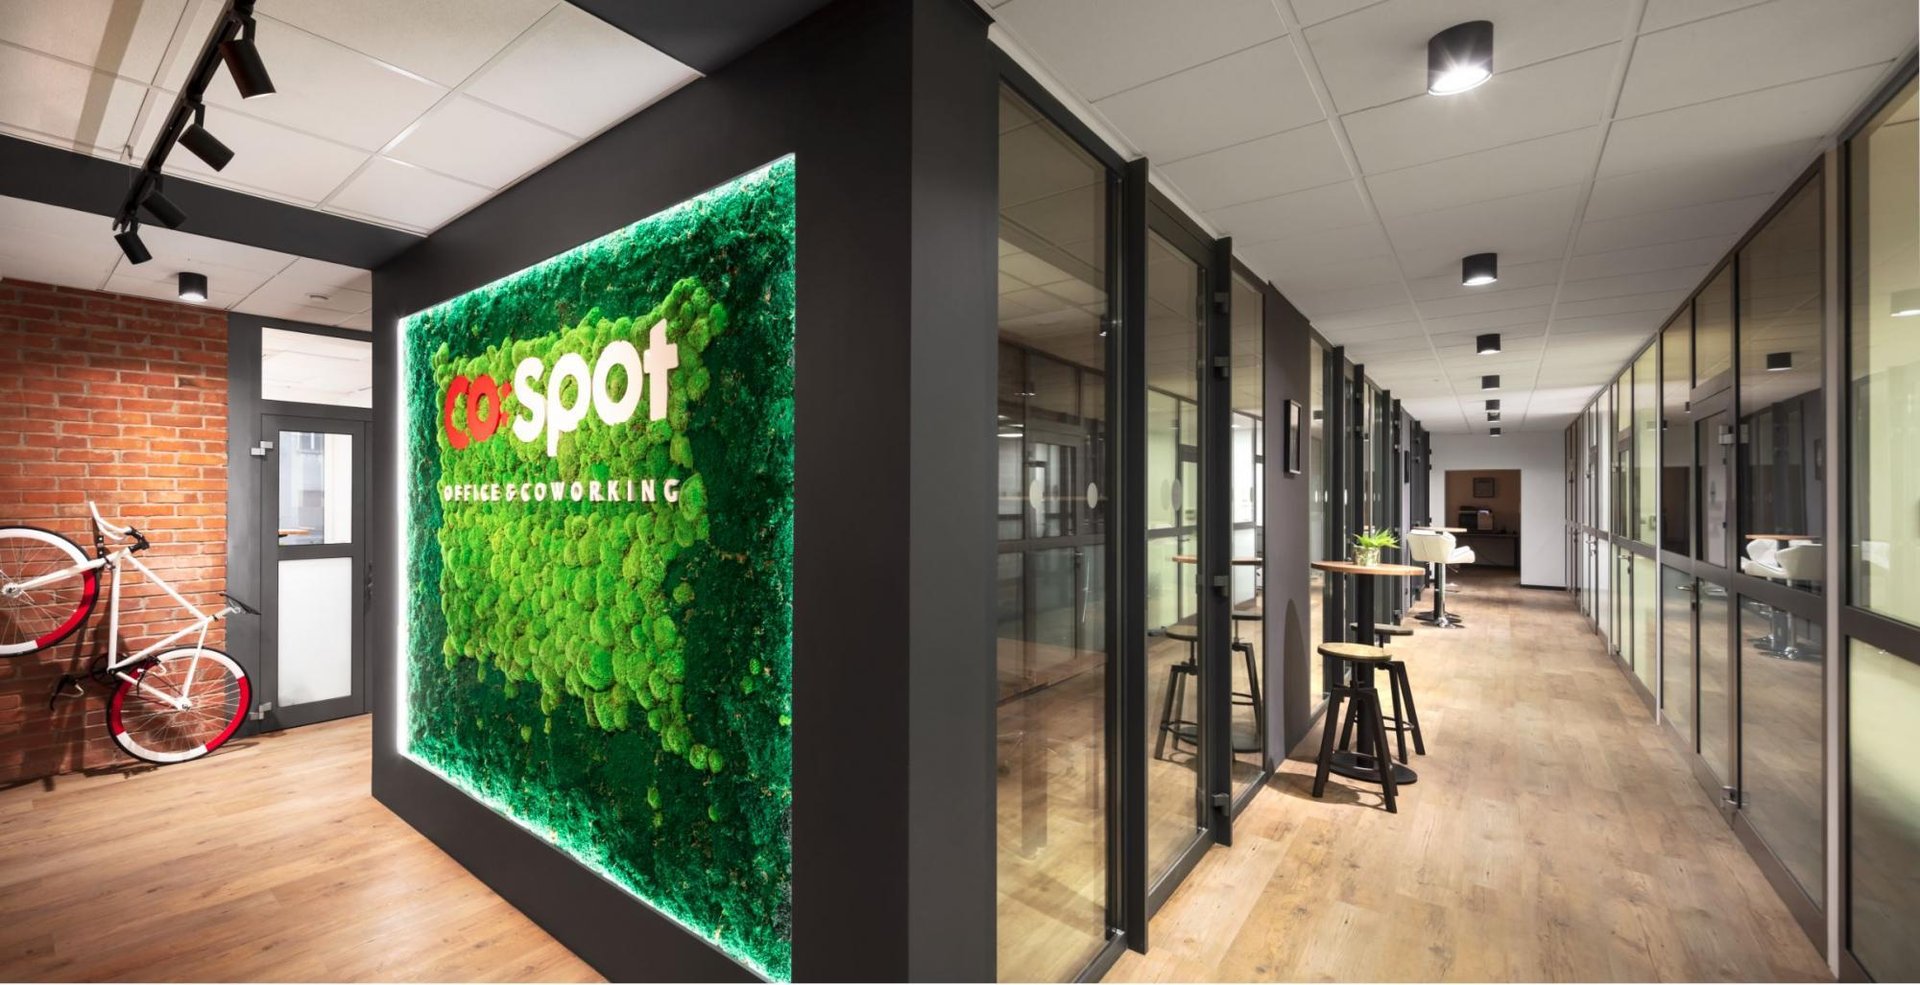 Biuro dla 6 os. w CoSpot office and coworking